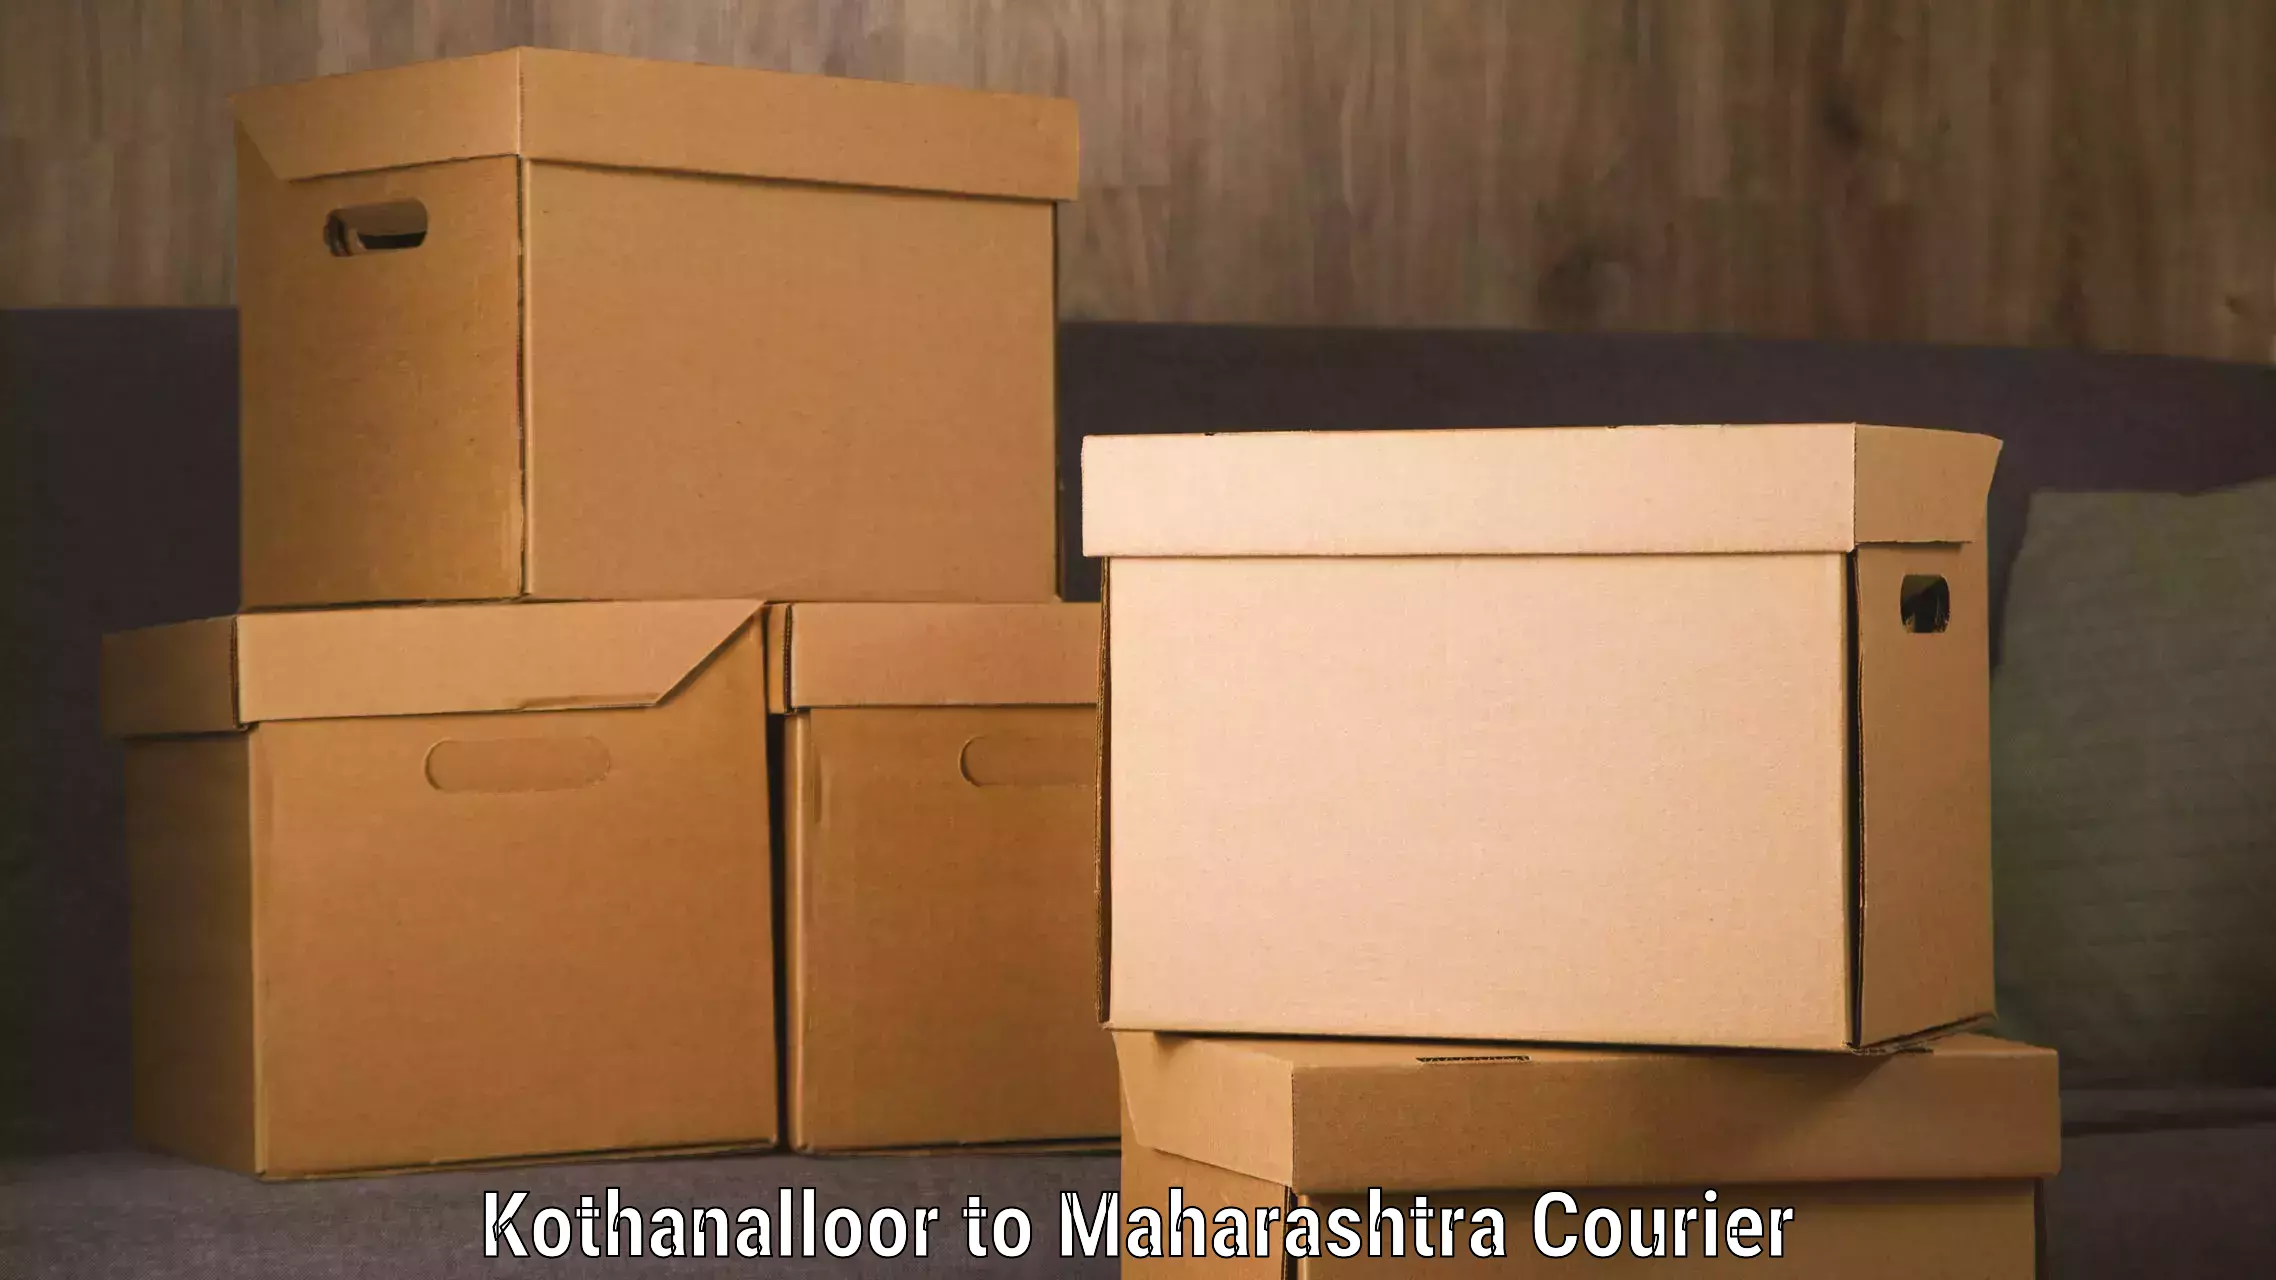 Courier service partnerships in Kothanalloor to Sillod